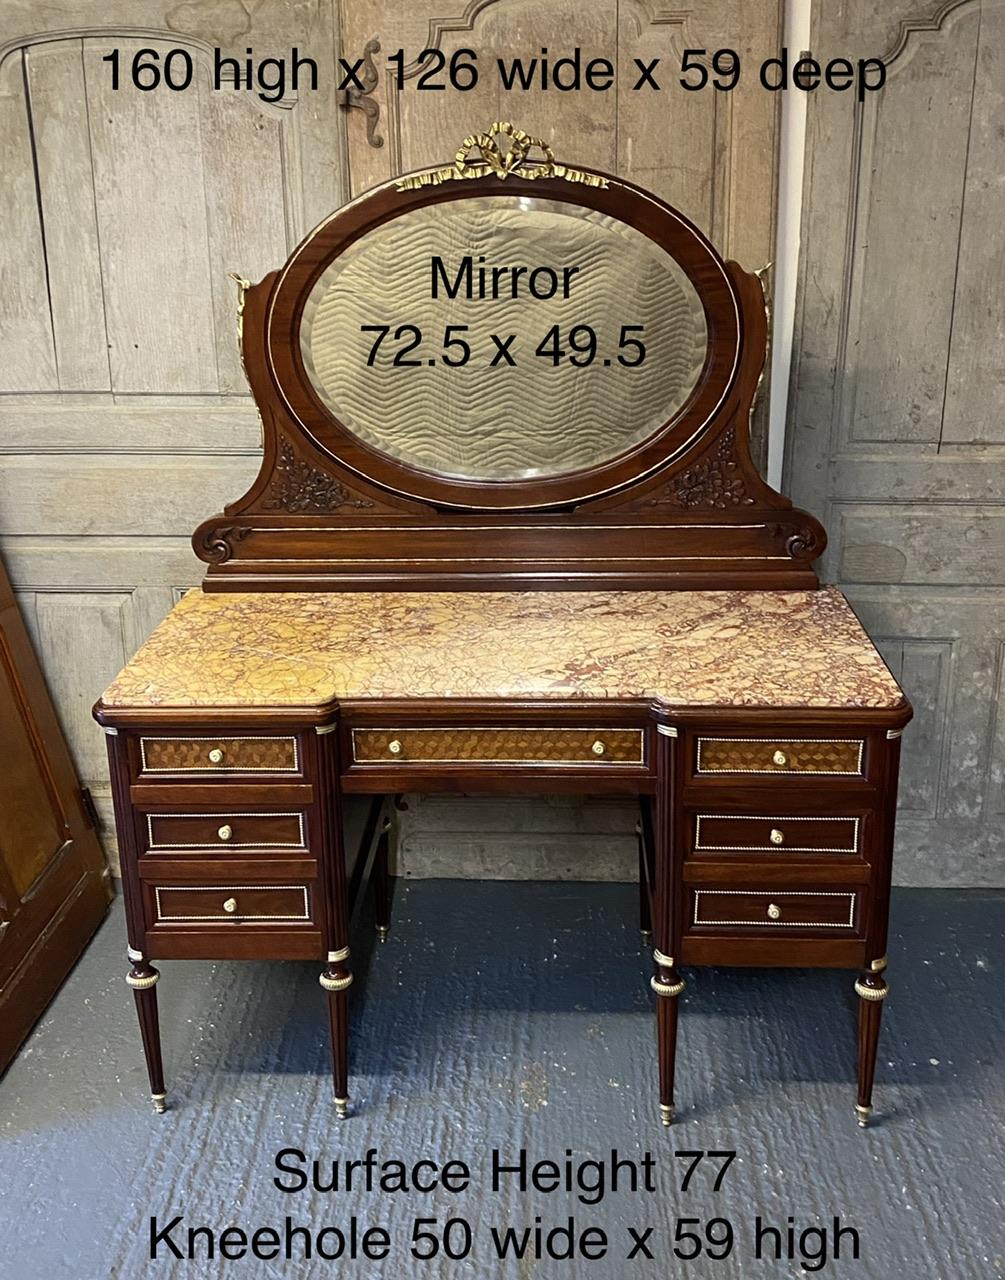 We are pleased to offer this extremely fine quality French Dressing Table. Dating to the 19th Century and of very good quality construction and craftsmanship as can be seen in the drawer dovetails. The original variegated marble top is in excellent